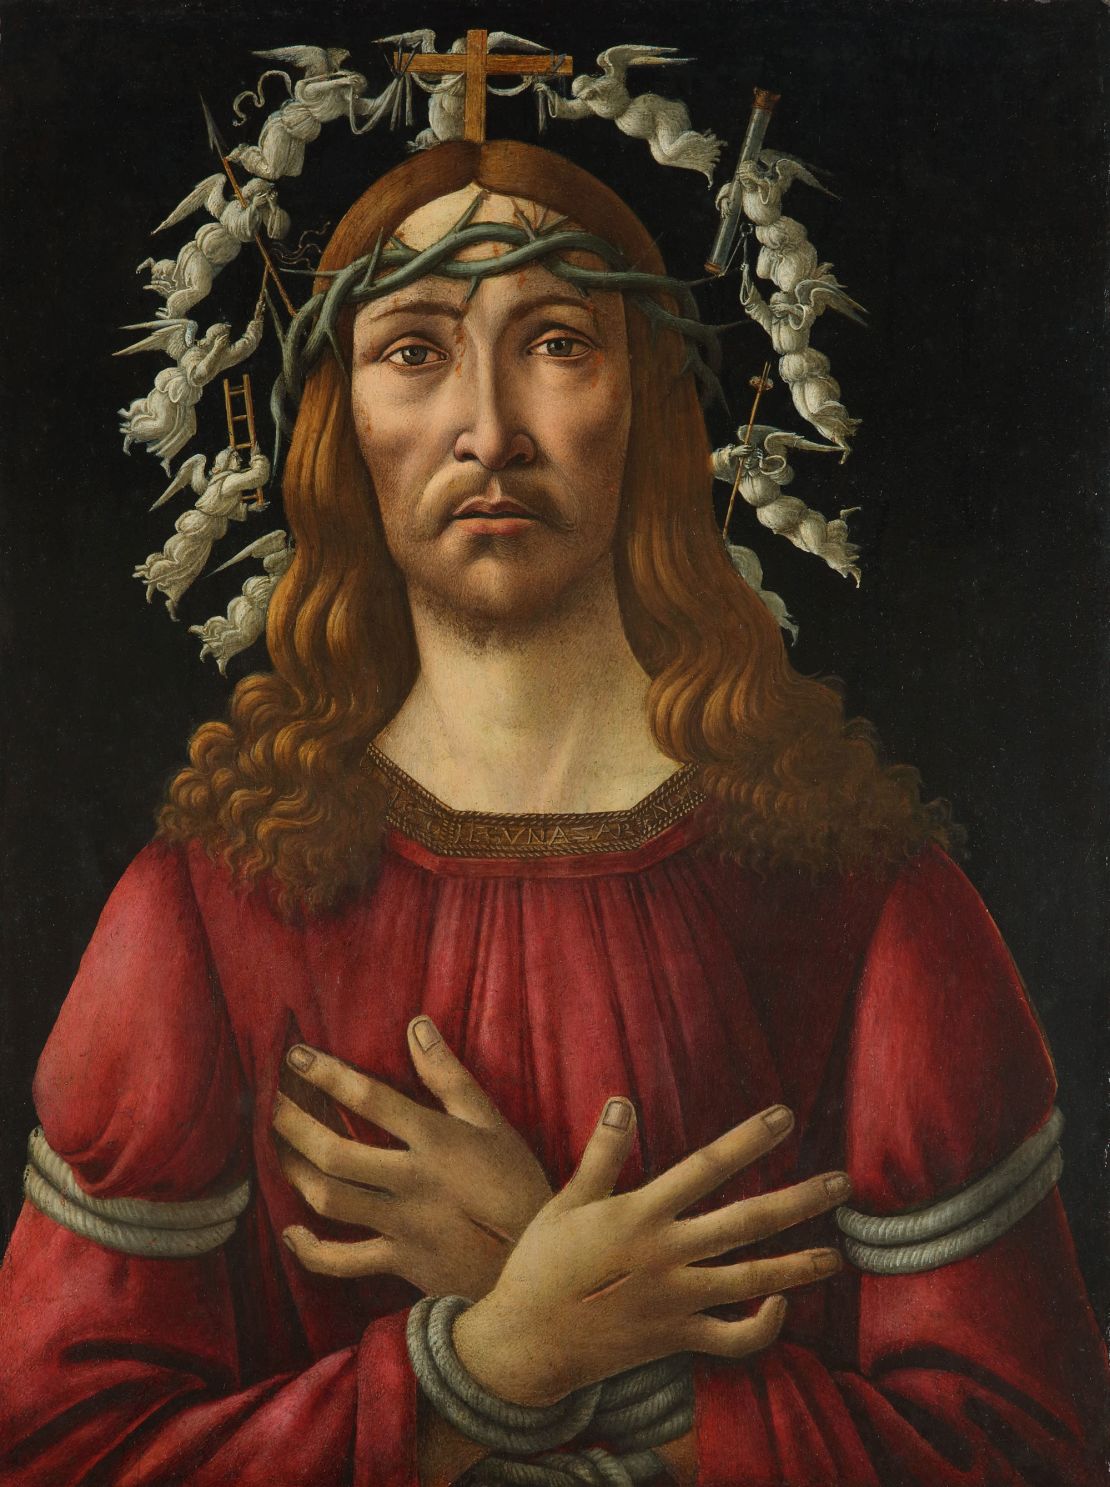 A closer view of Sandro Botticelli's "The Man of Sorrows."